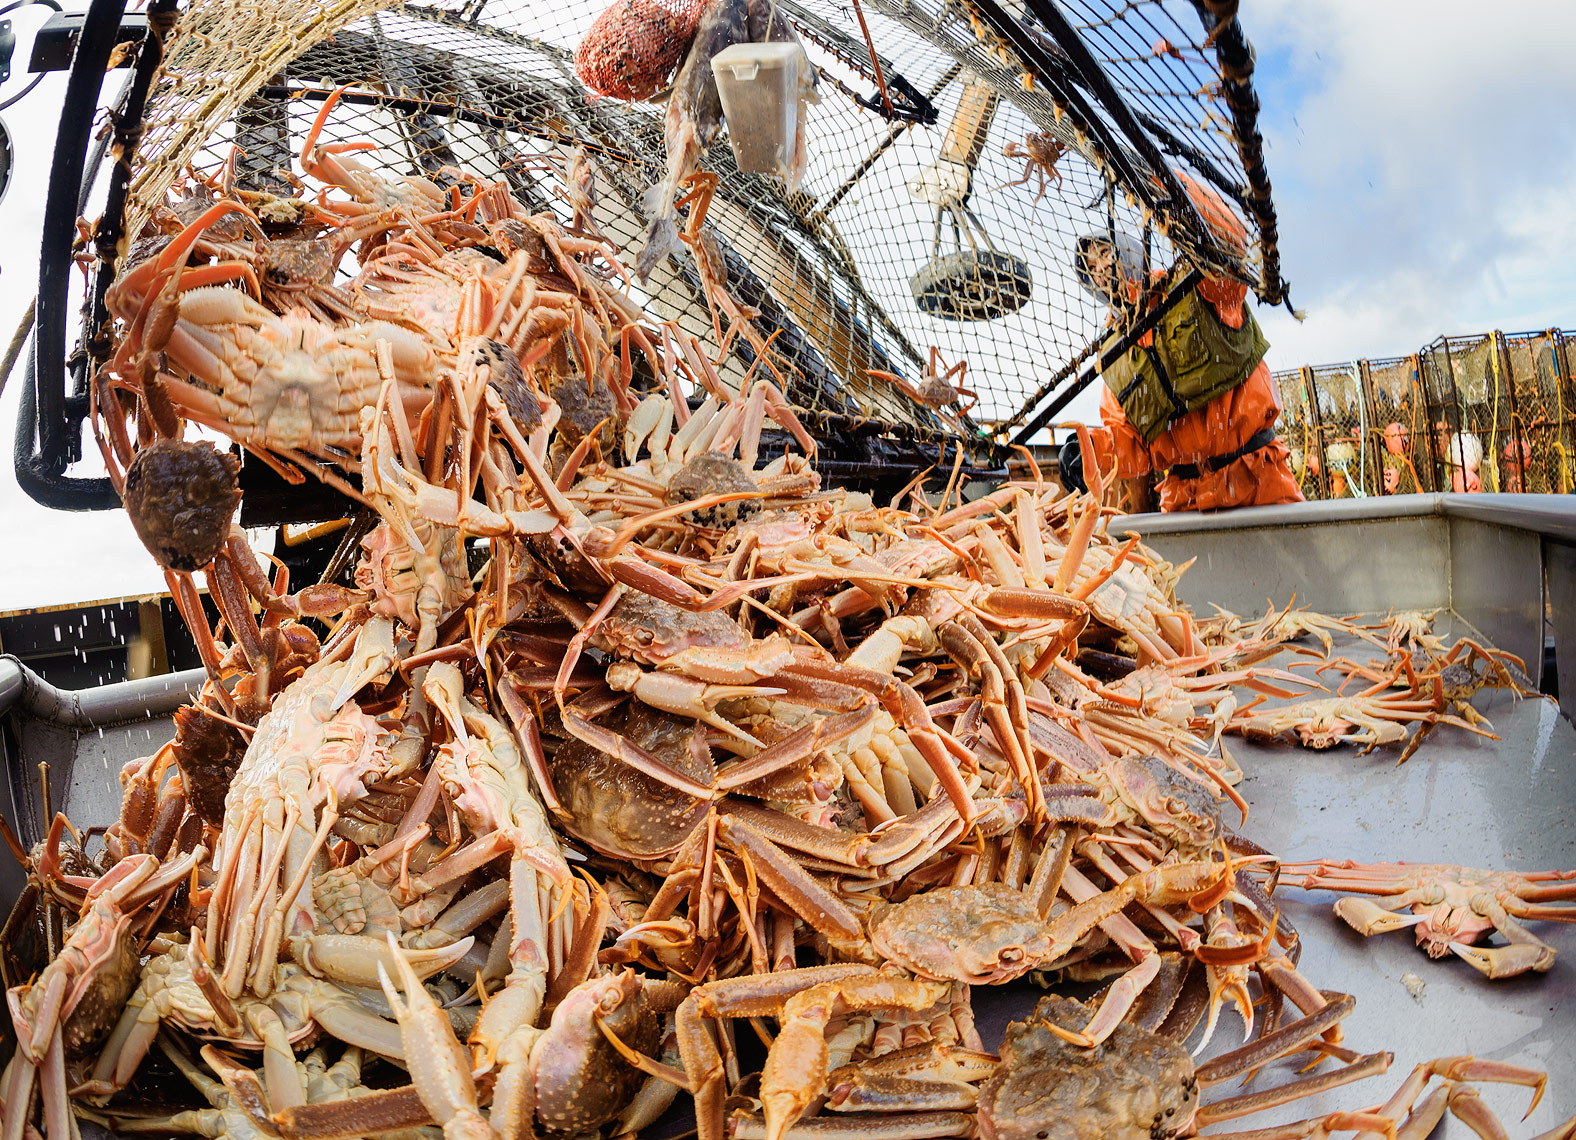 How an Alaskan fisherman saw potential for a sustainability startup in a mountain of crab shells